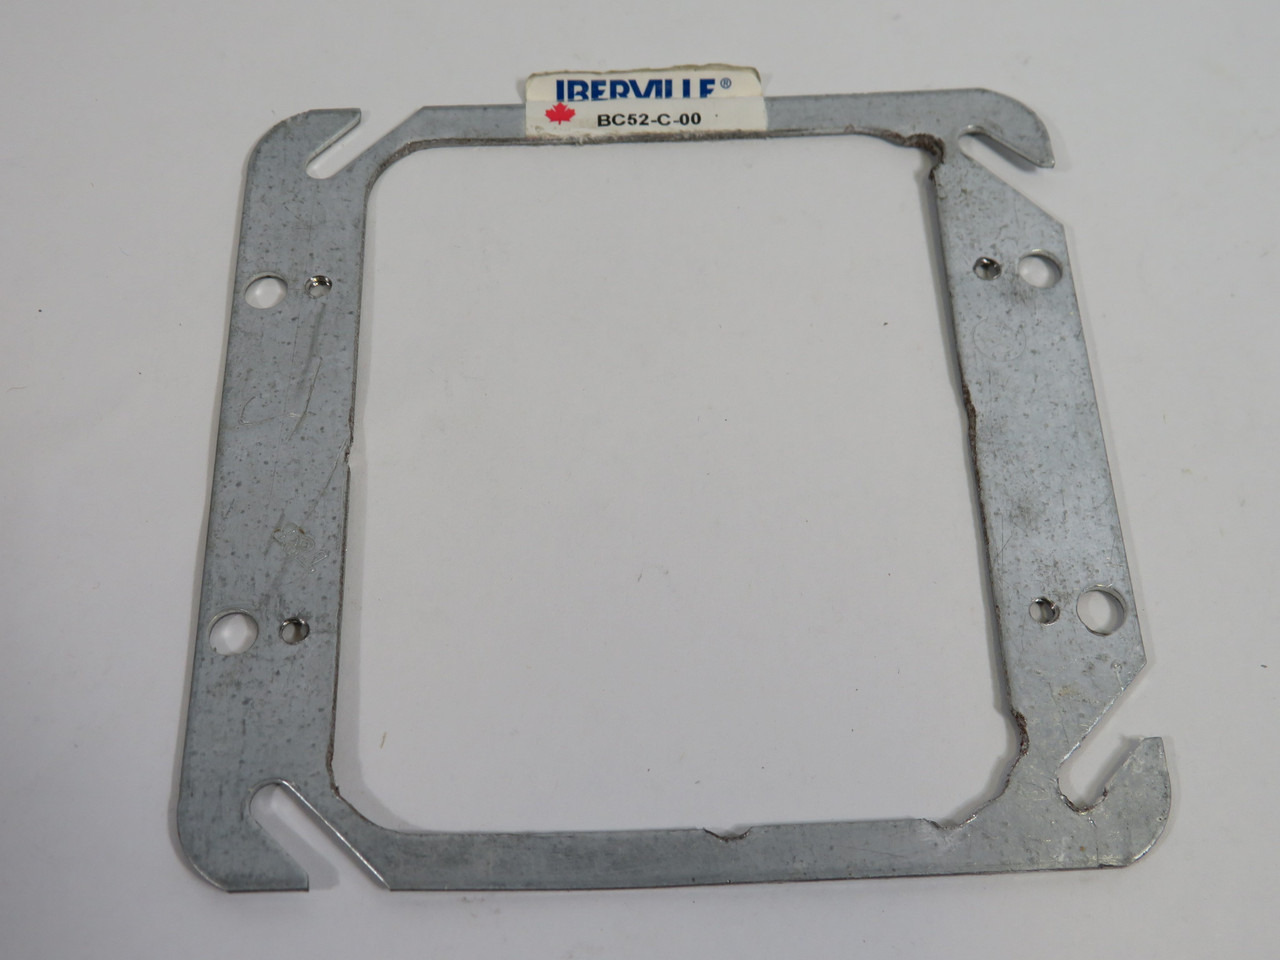 Iberville BC52-C-00 Square Box Cover 4-1/8" OD COSMETIC DAMAGE USED